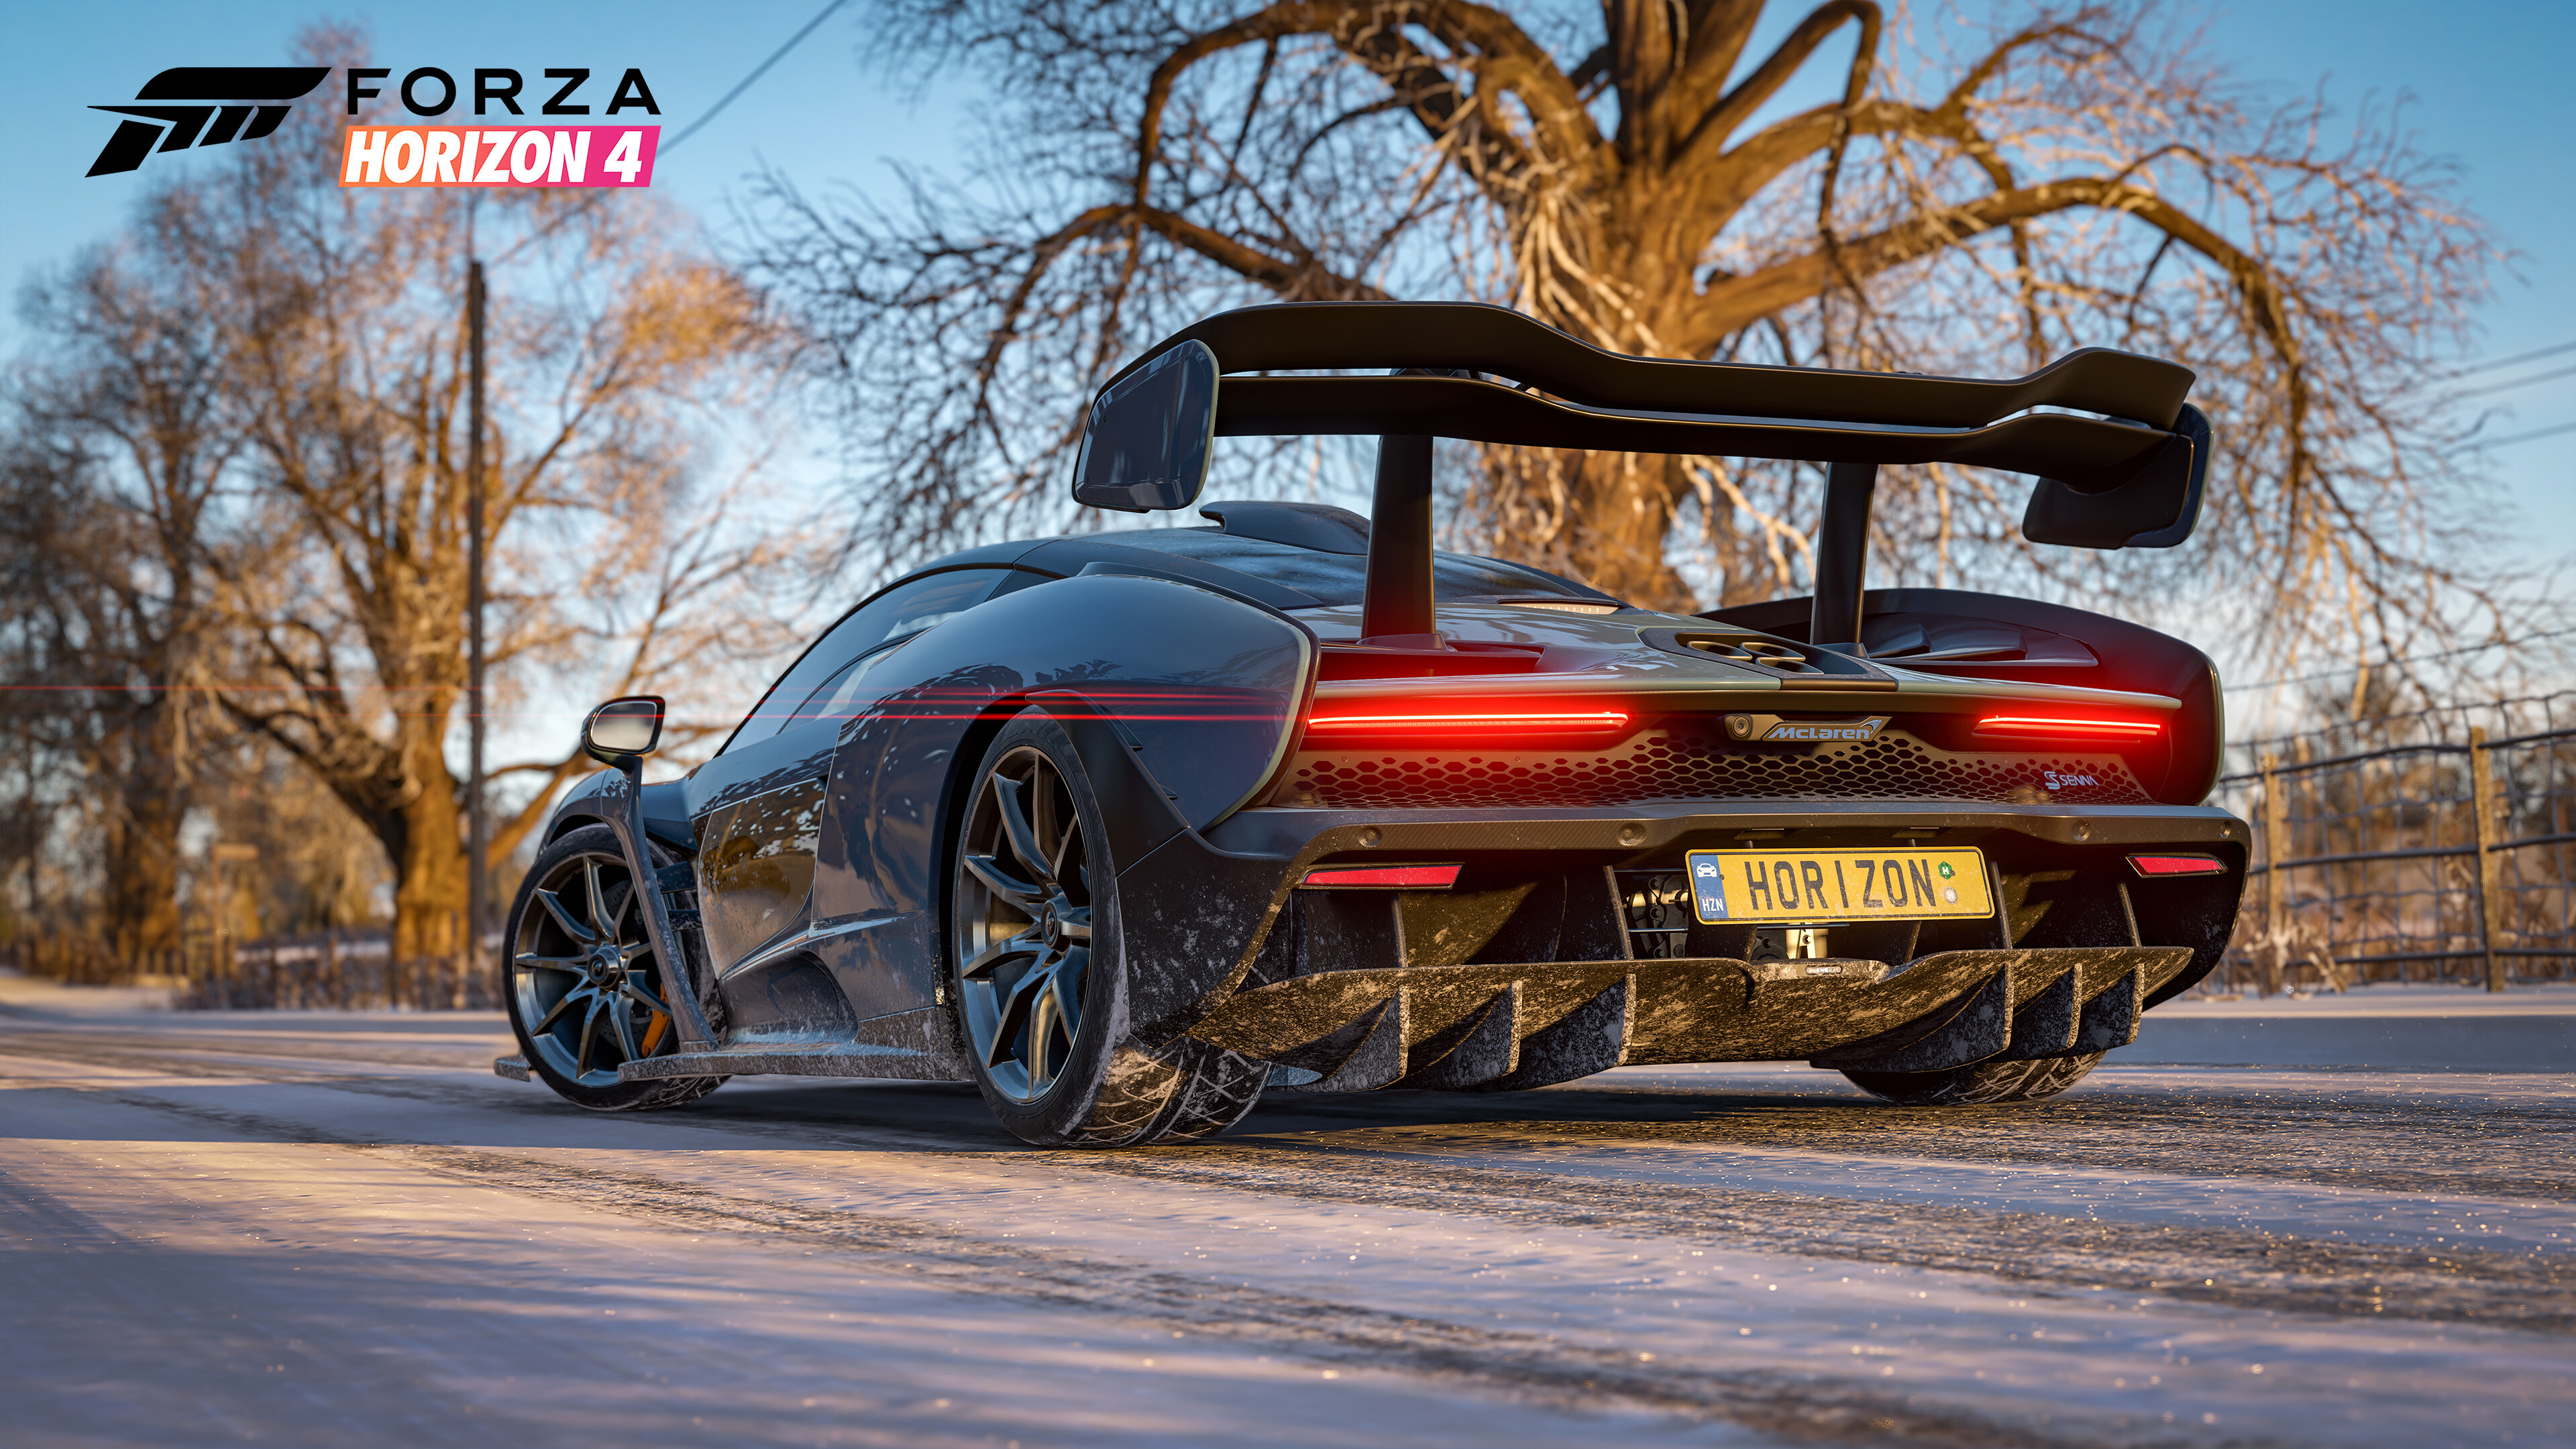 Forza Horizon: Players have the opportunity to buy in-game houses which unlock new items, cars and game-play perks, Mclaren. 3840x2160 4K Wallpaper.